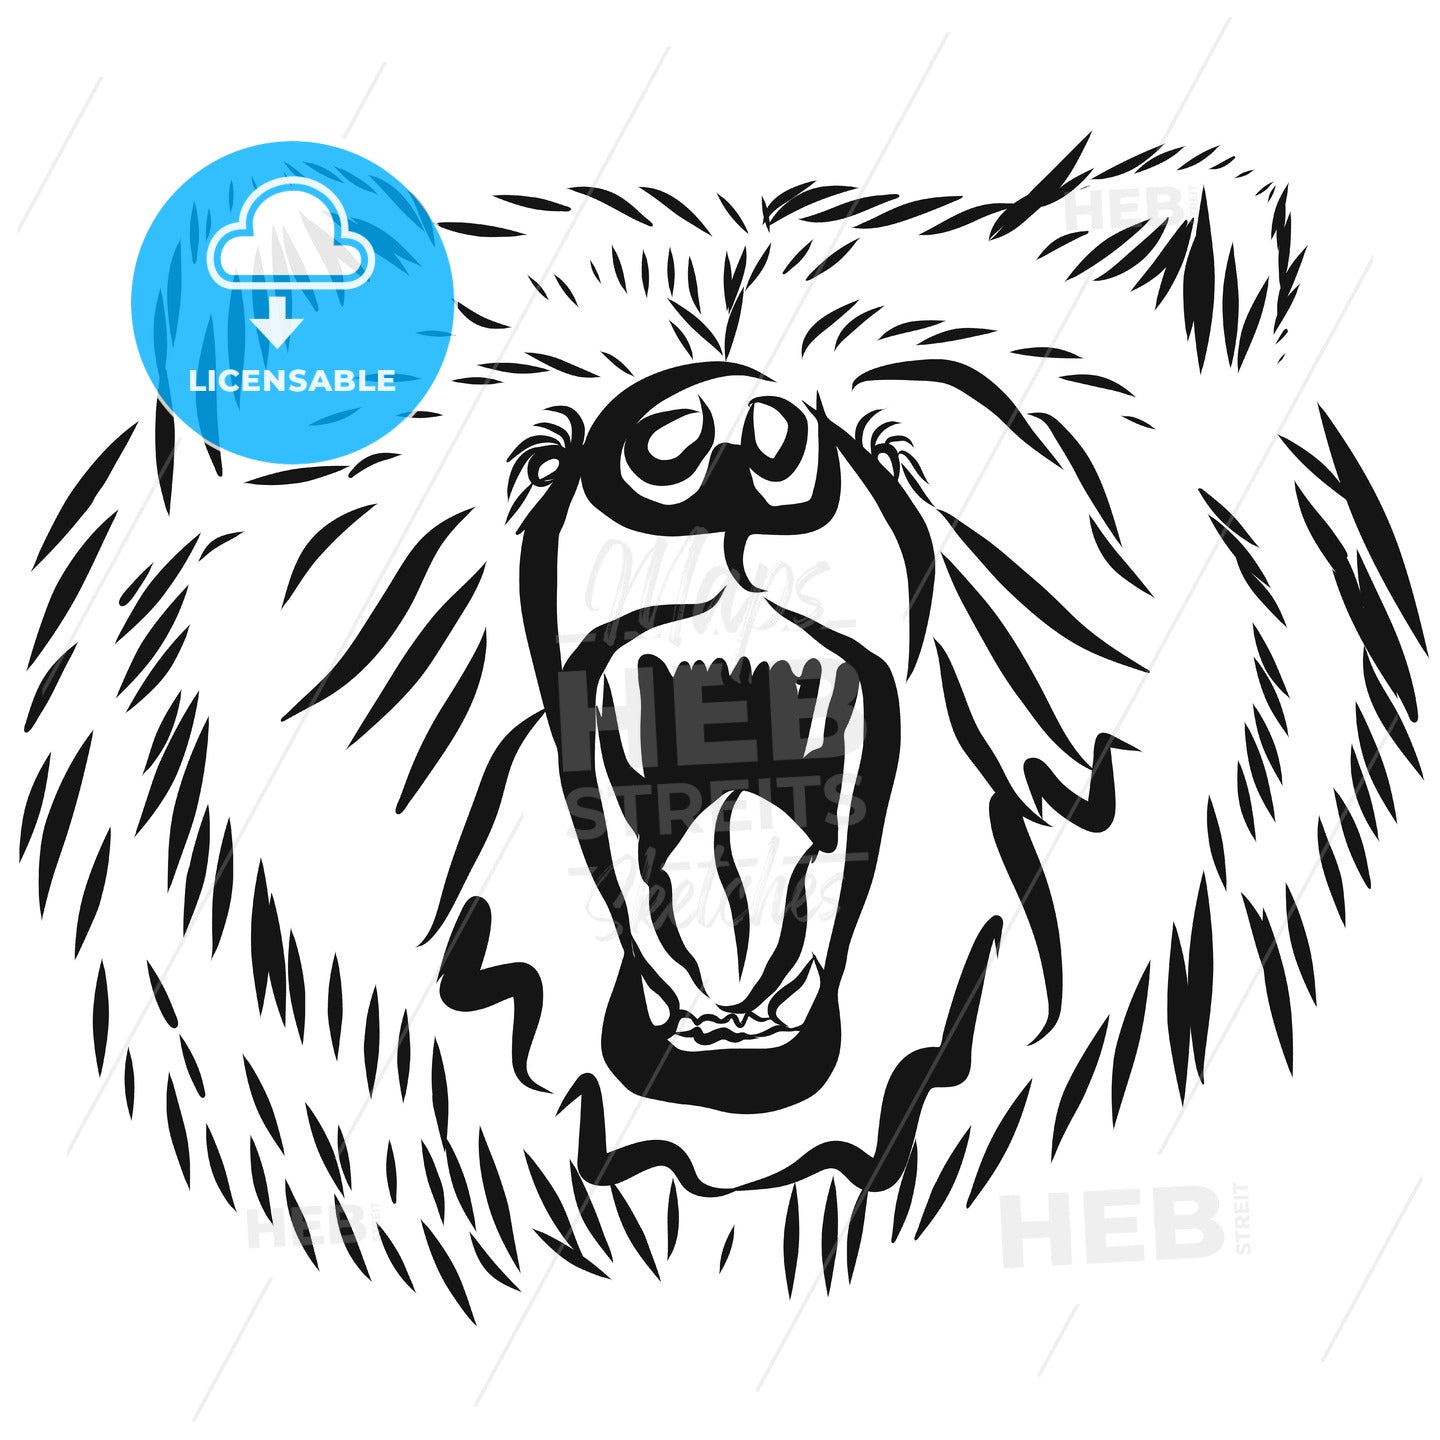 grizzly bear head, rearing angry pose – instant download